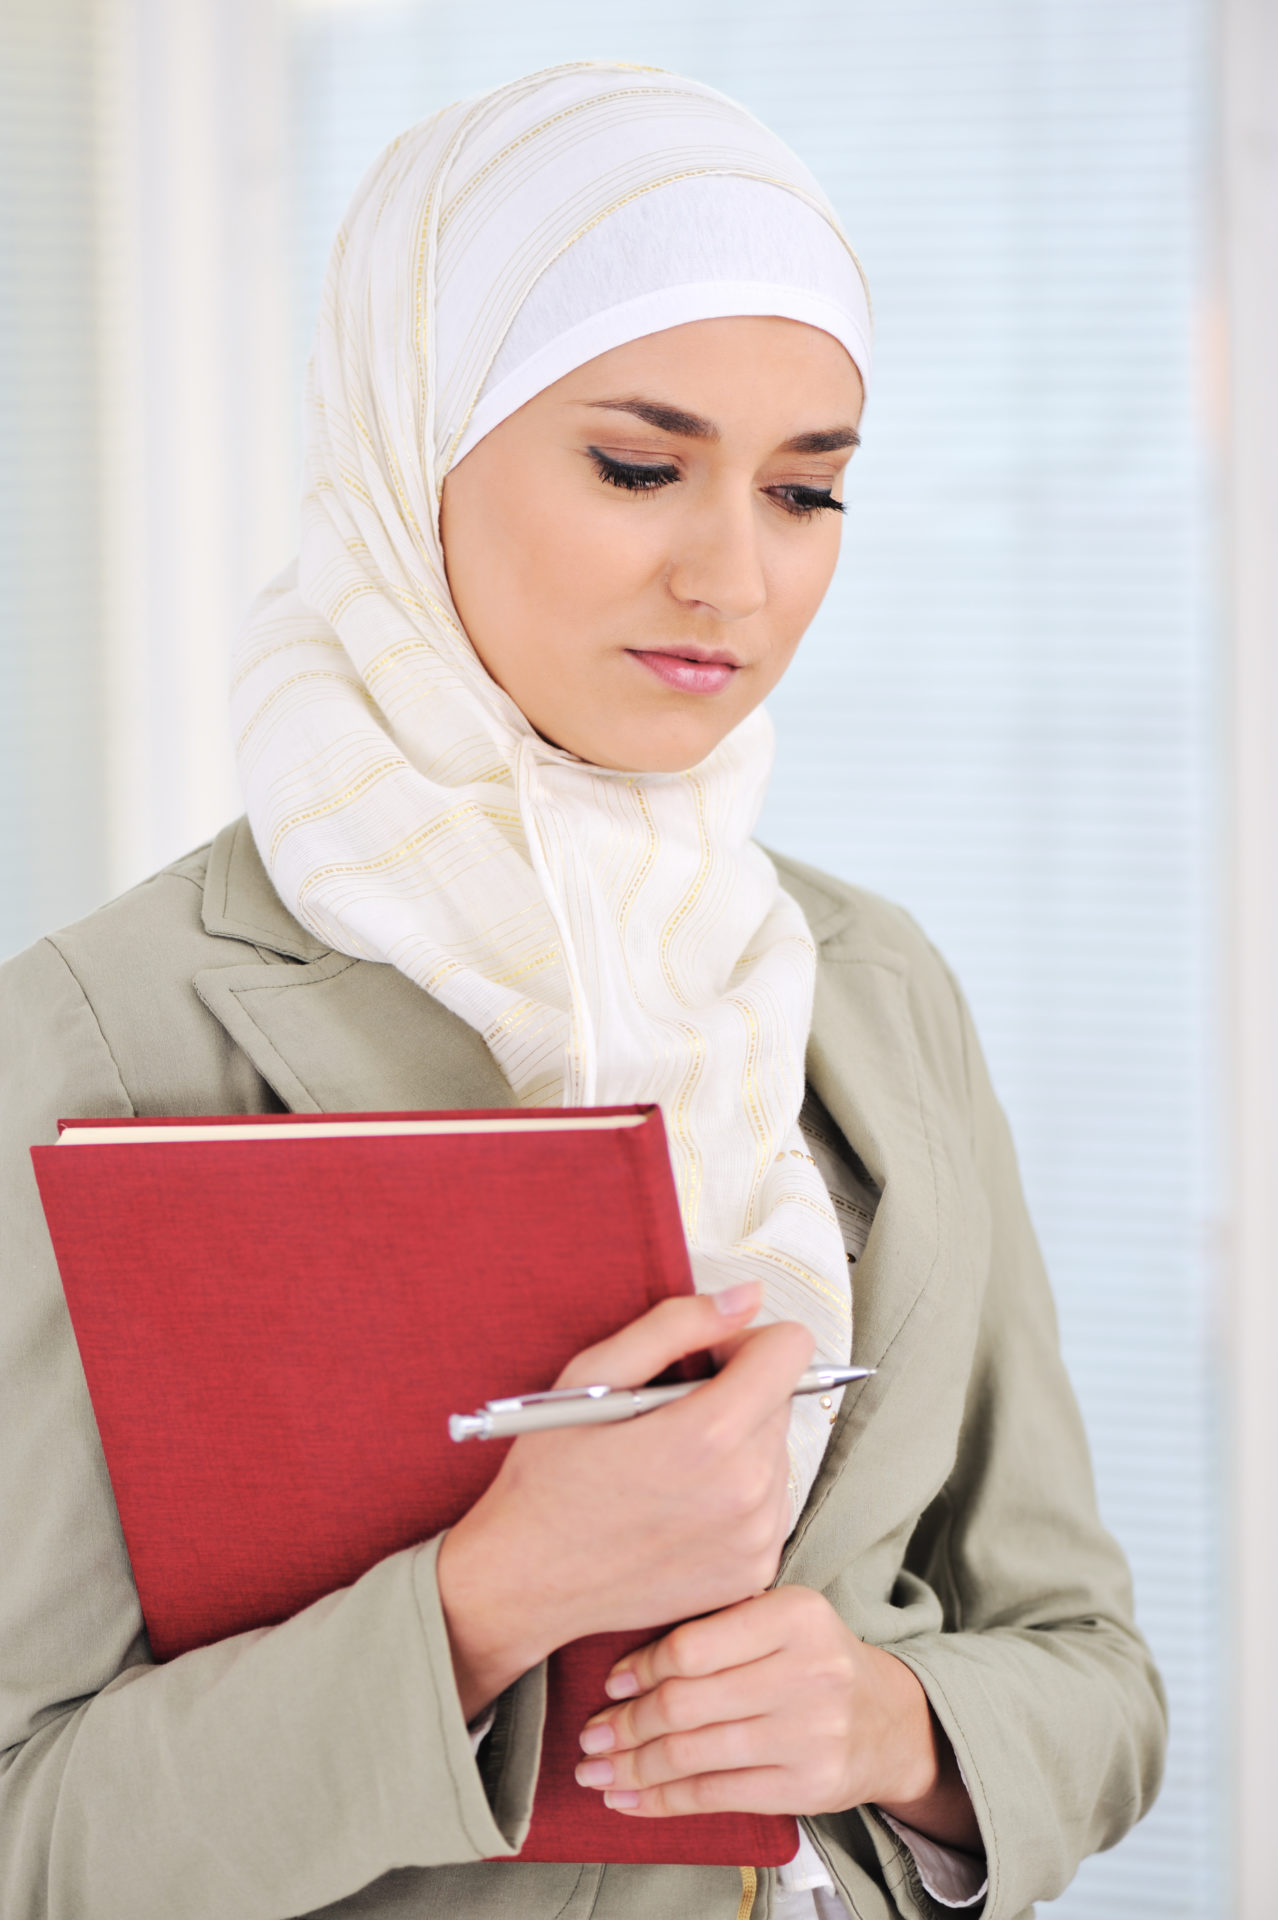 CAIR-OK Welcomes ‘Historic’ Supreme Court Ruling in Abercrombie & Fitch Hijab Case